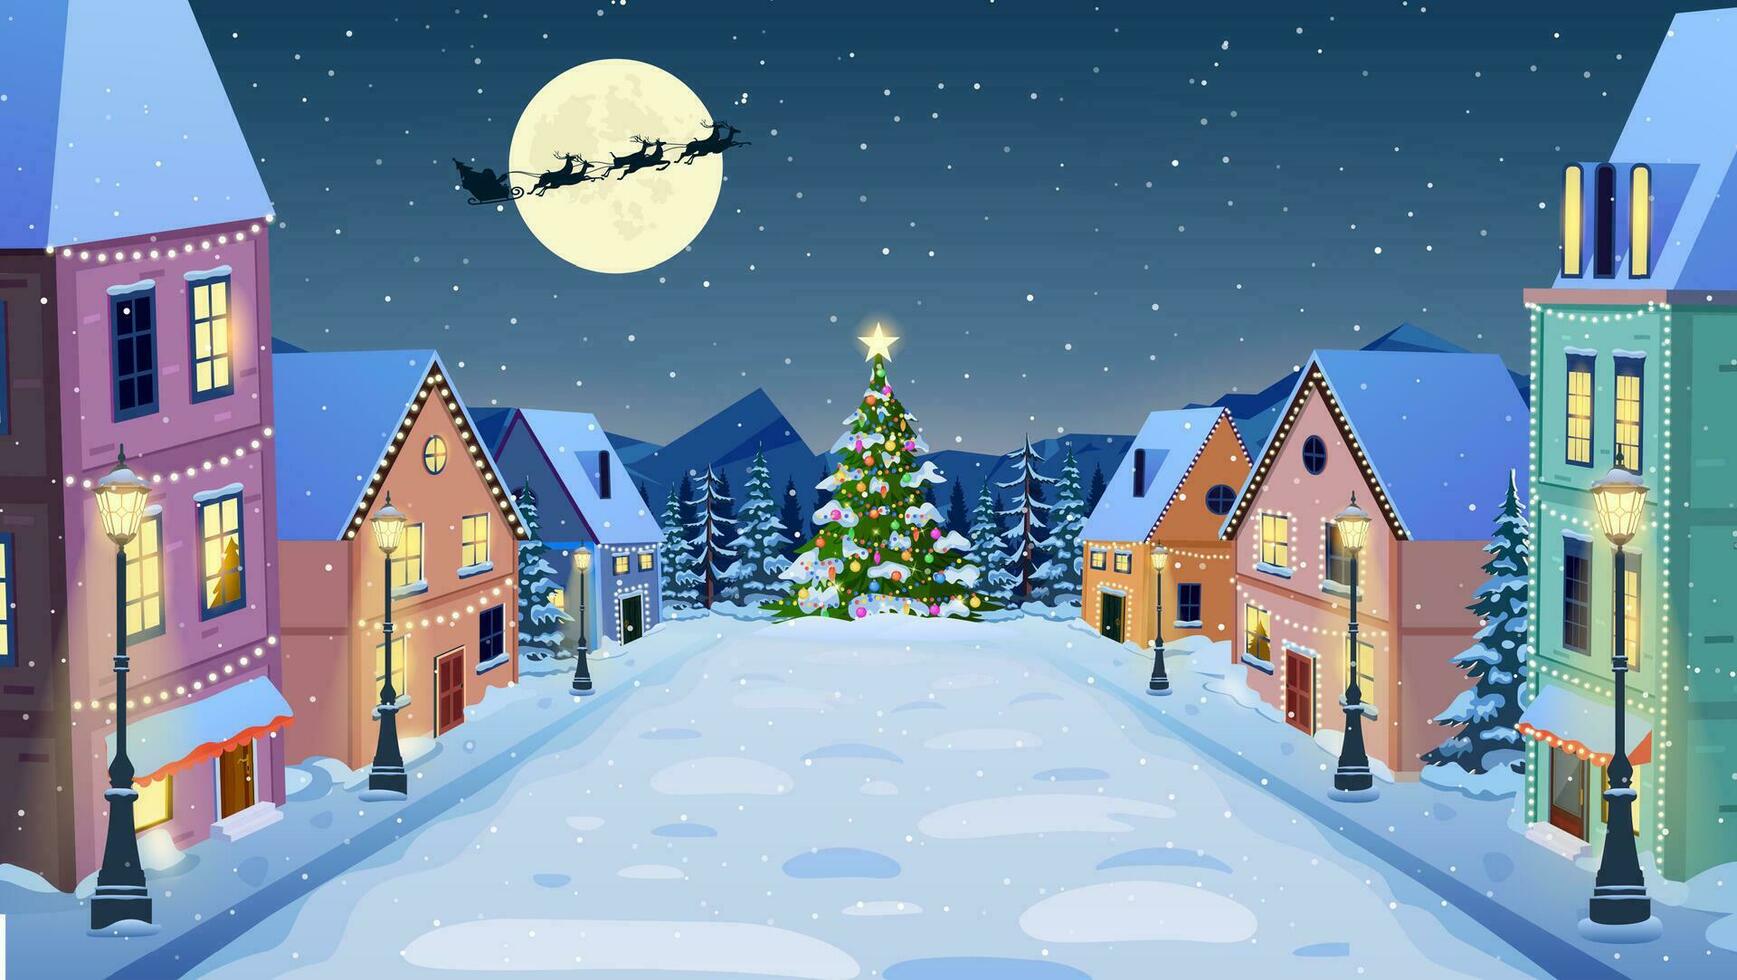 cartoon winter city street with lights in the night in snow fall and christmas tree. Merry Christmas and Happy New Year greeting card. Santa Claus with deers in sky above the city. Vector illustration